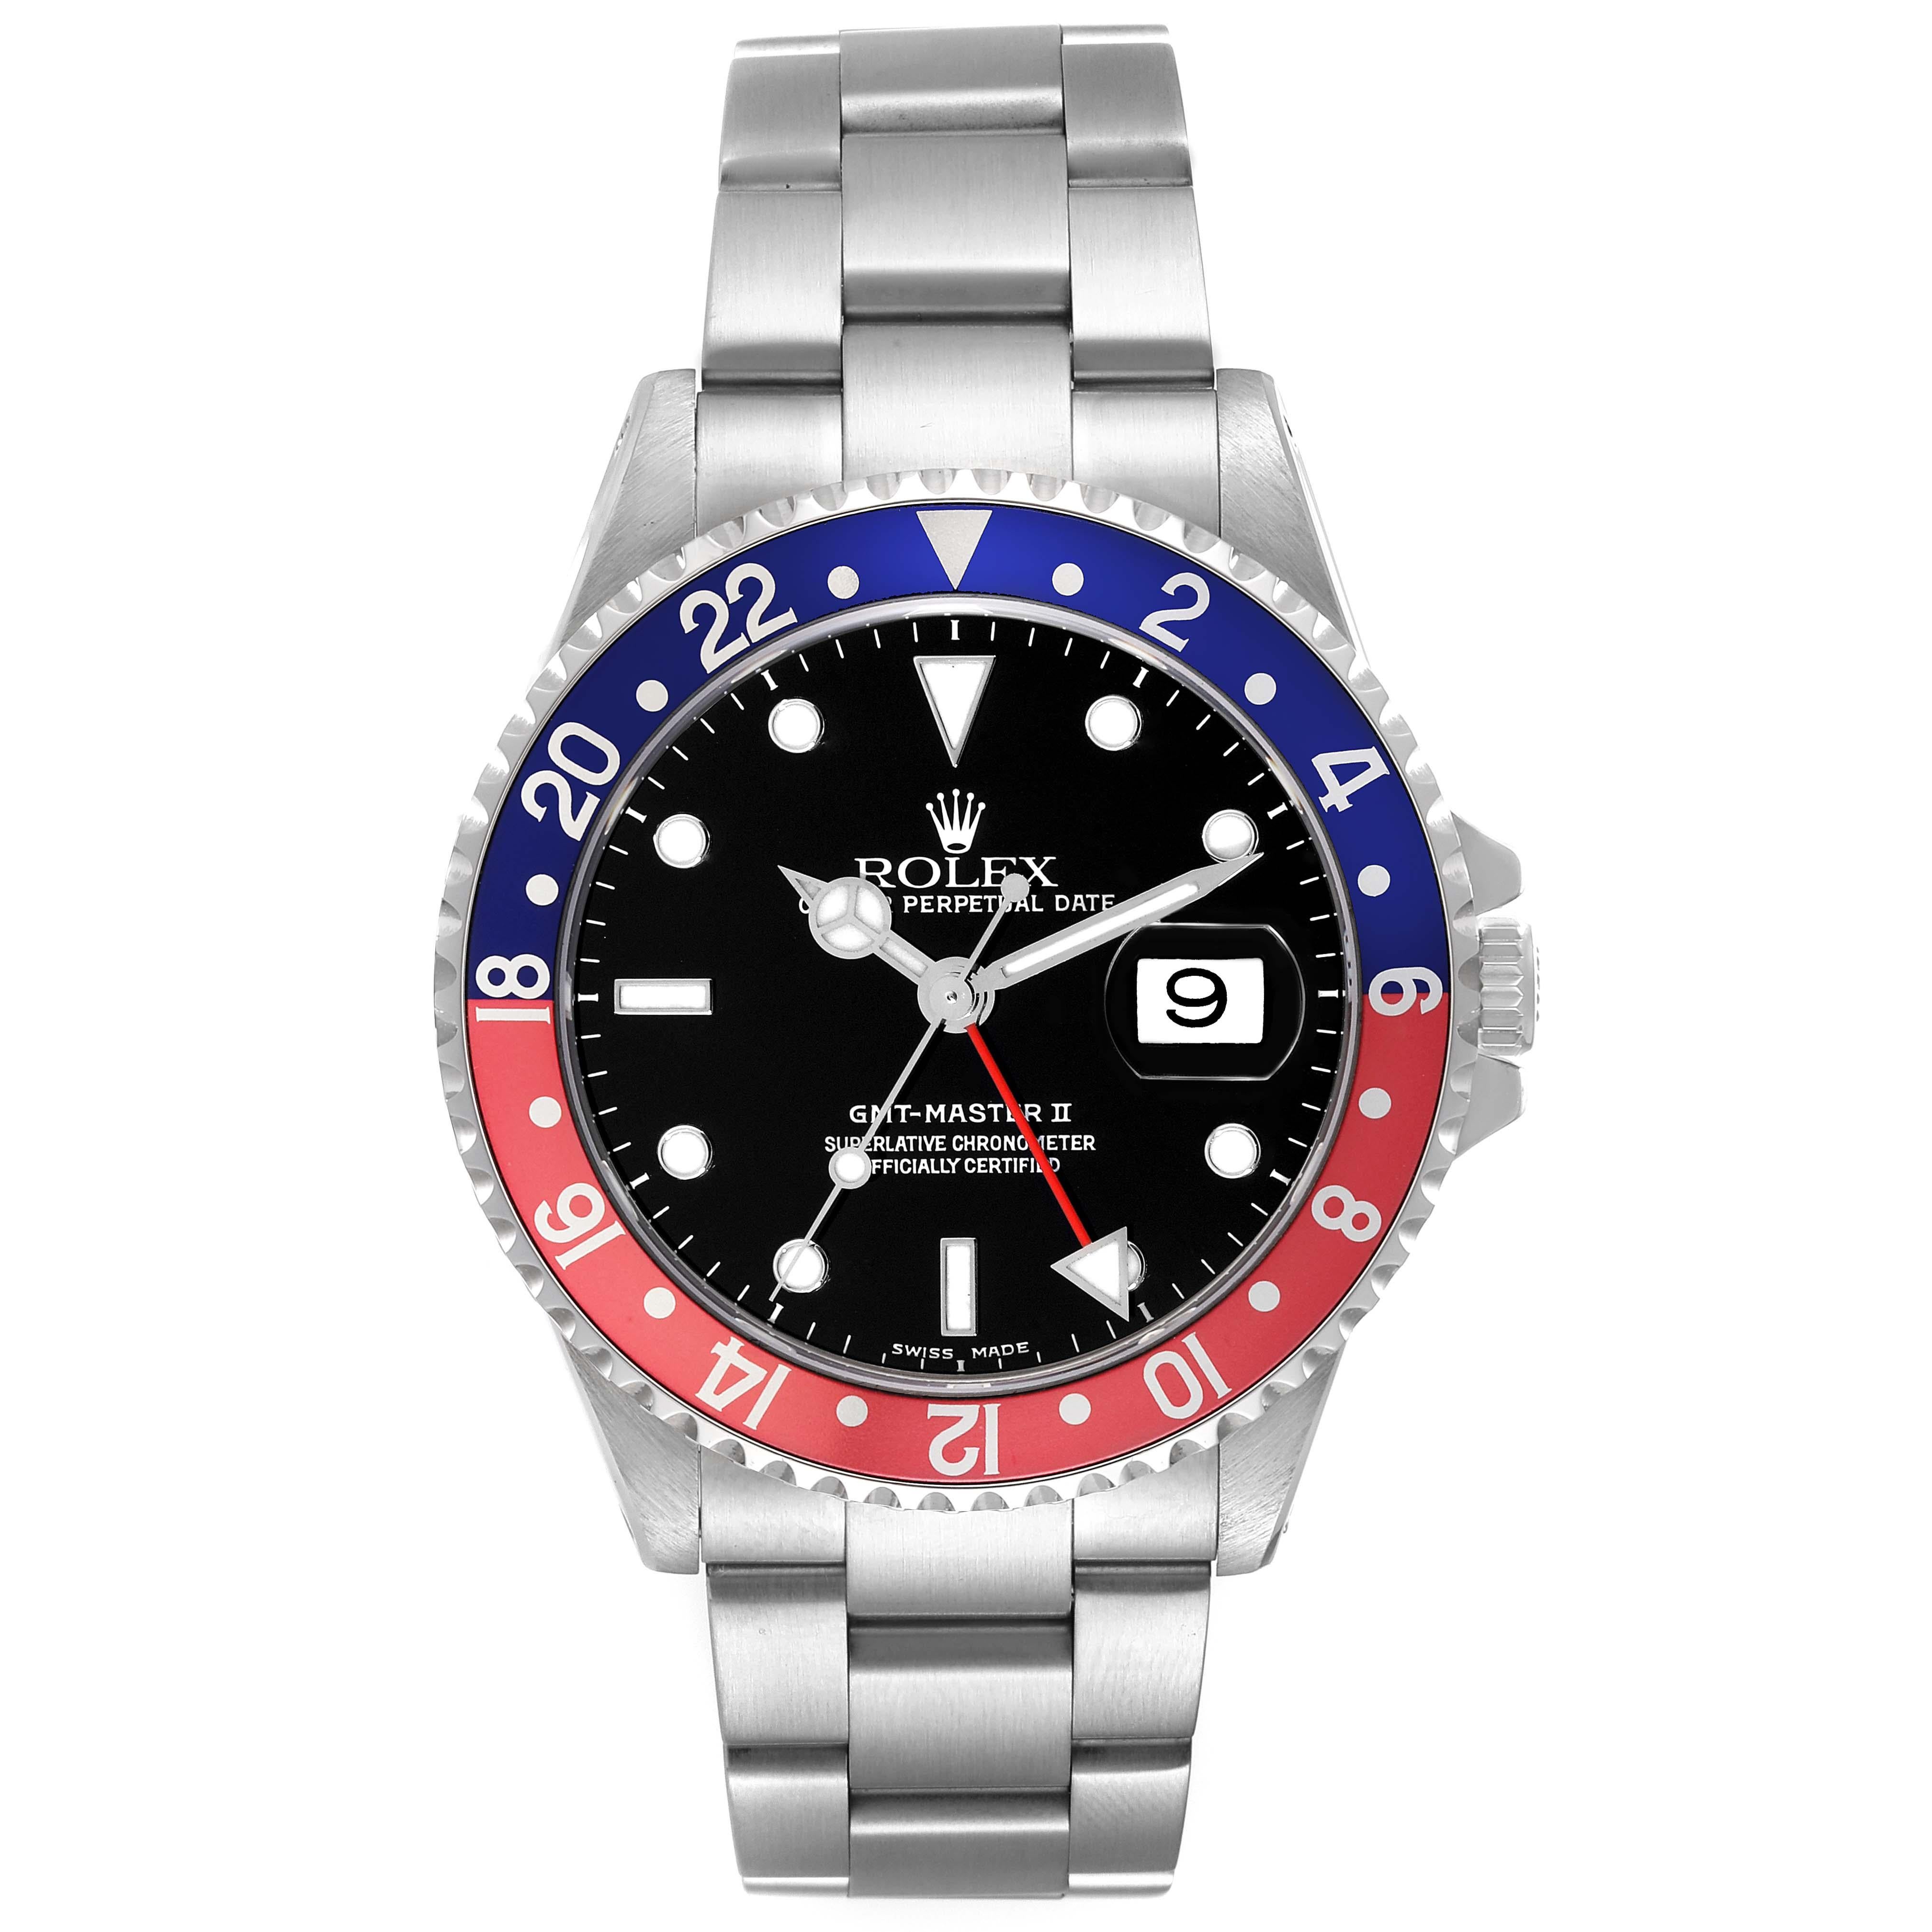 Rolex GMT Master II Blue Red Pepsi Bezel Steel Mens Watch 16710. Officially certified chronometer automatic self-winding movement. Stainless steel case 40.0 mm in diameter. Rolex logo on the crown. Bidirectional rotating GMT bezel with a special